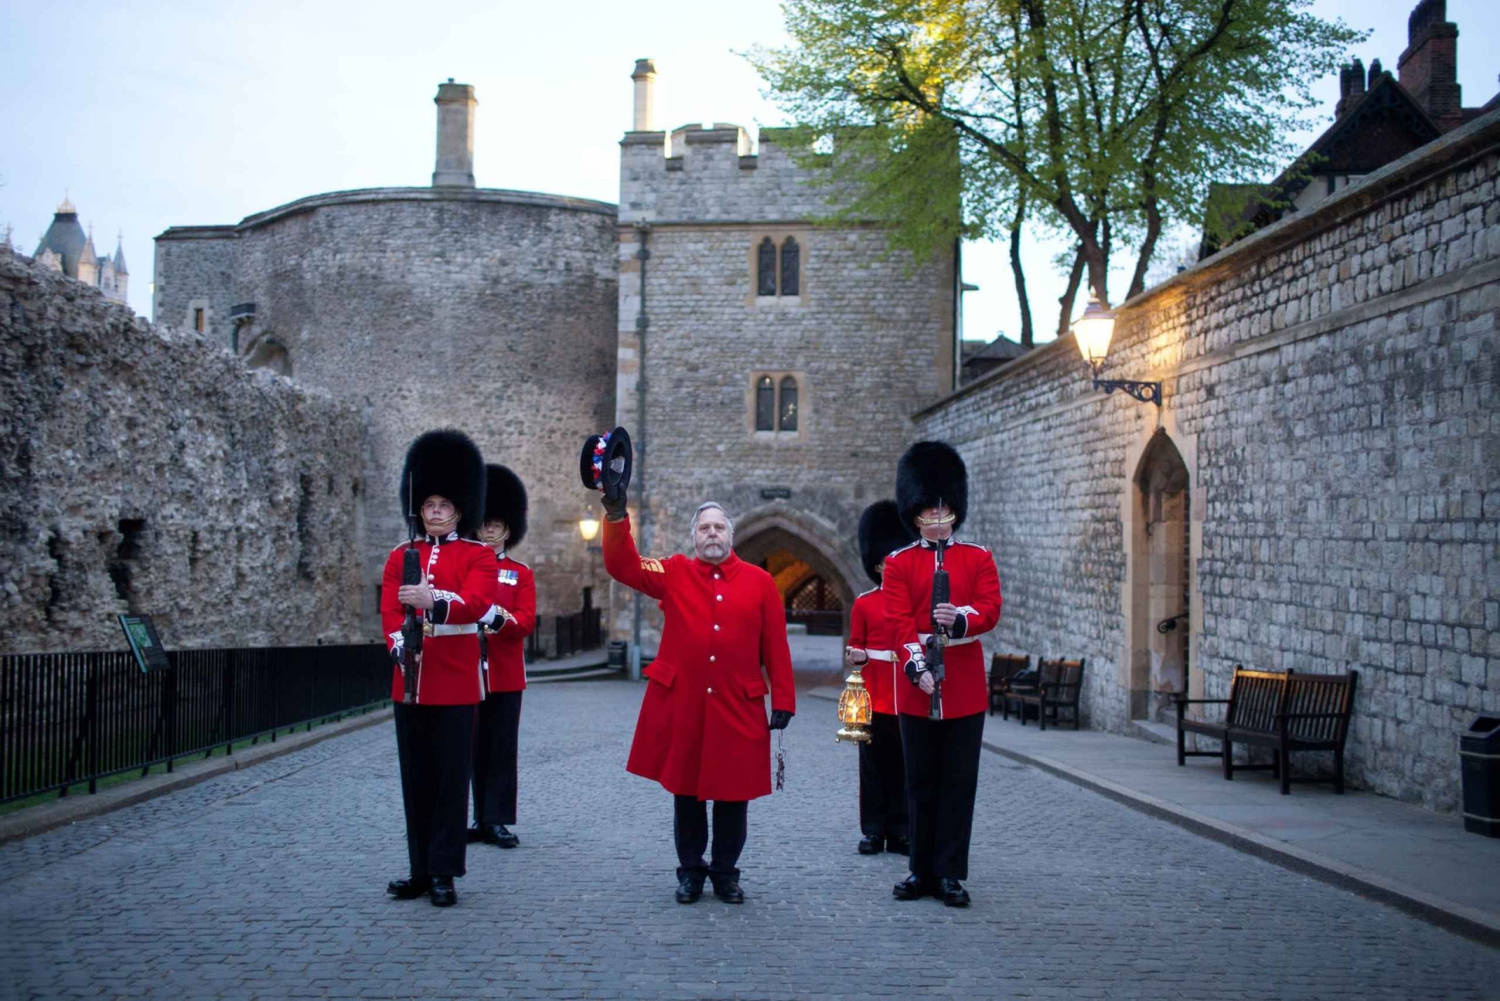 London: Tower of London After Hours Tour and Key Ceremony